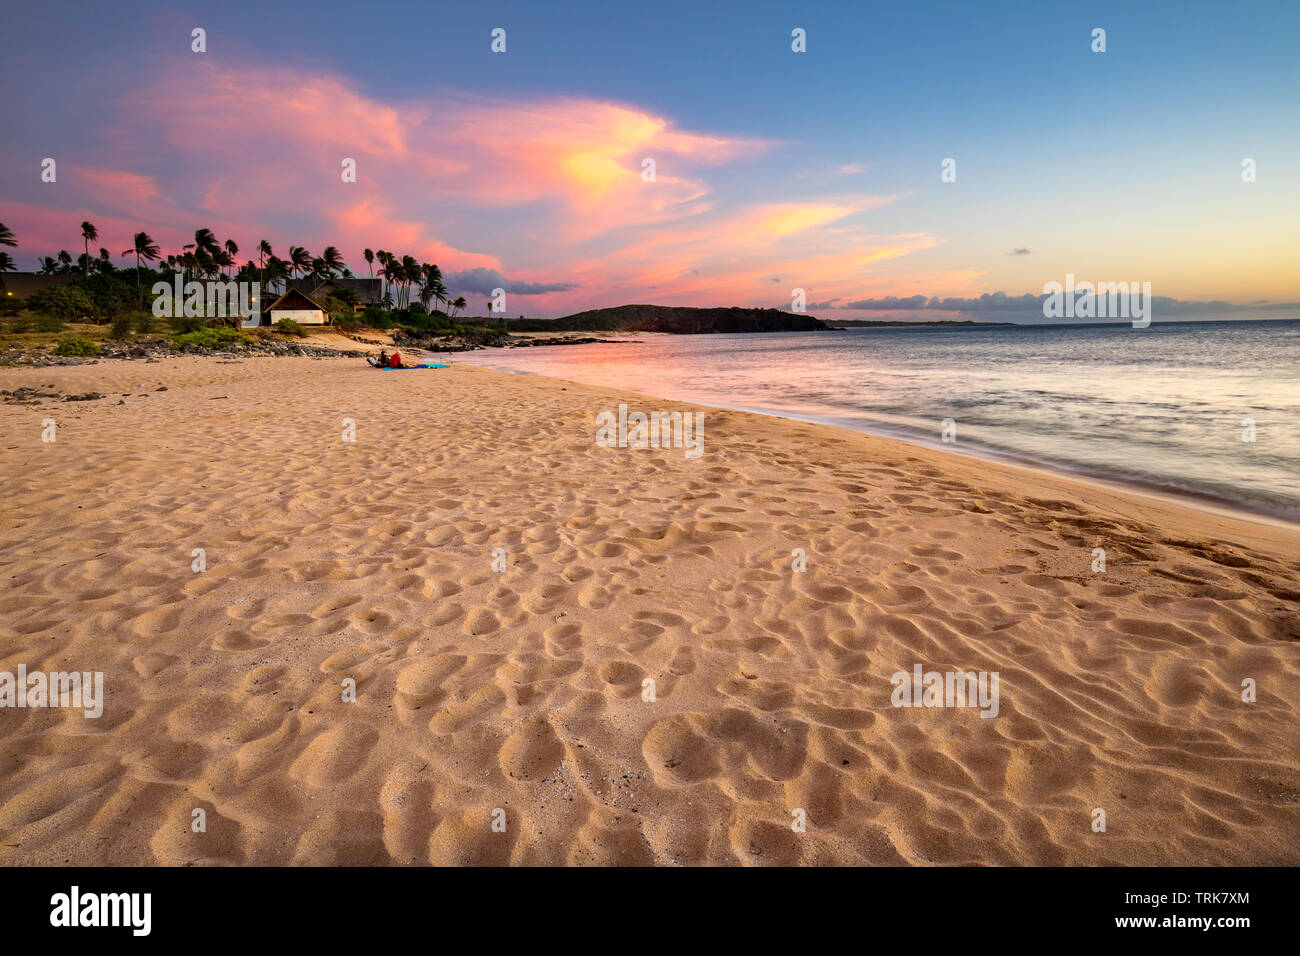 A sandy, calm beach and palm trees at Kepuhi Beach on the west end of the island of Molokai, Hawaii, United States of America, Pacific. Stock Photo